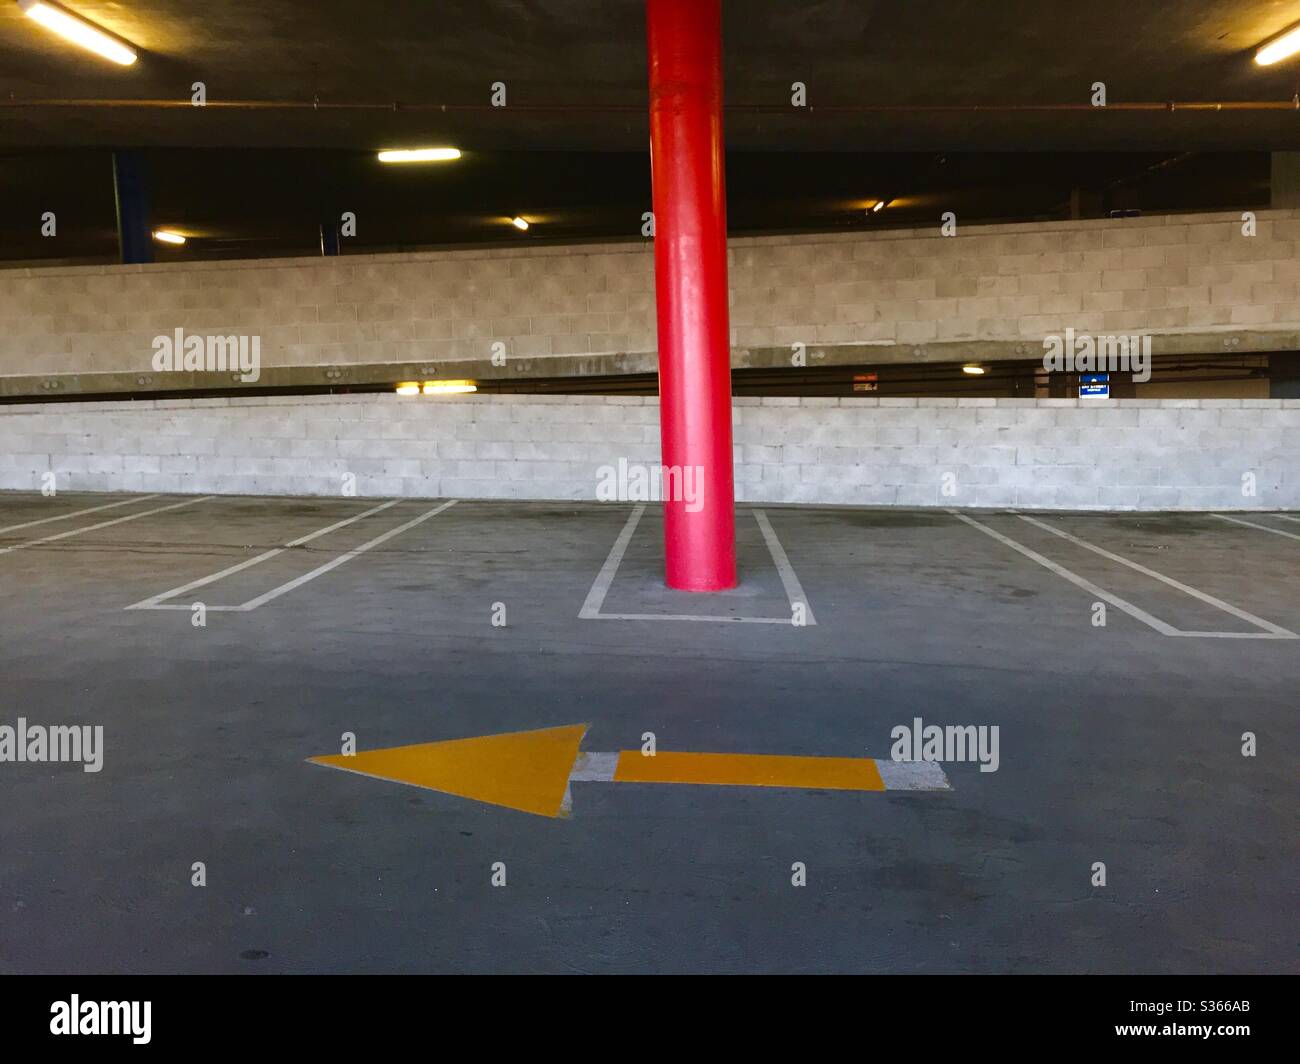 Red pillar and yellow arrown in a multi-level parking garage. Stock Photo